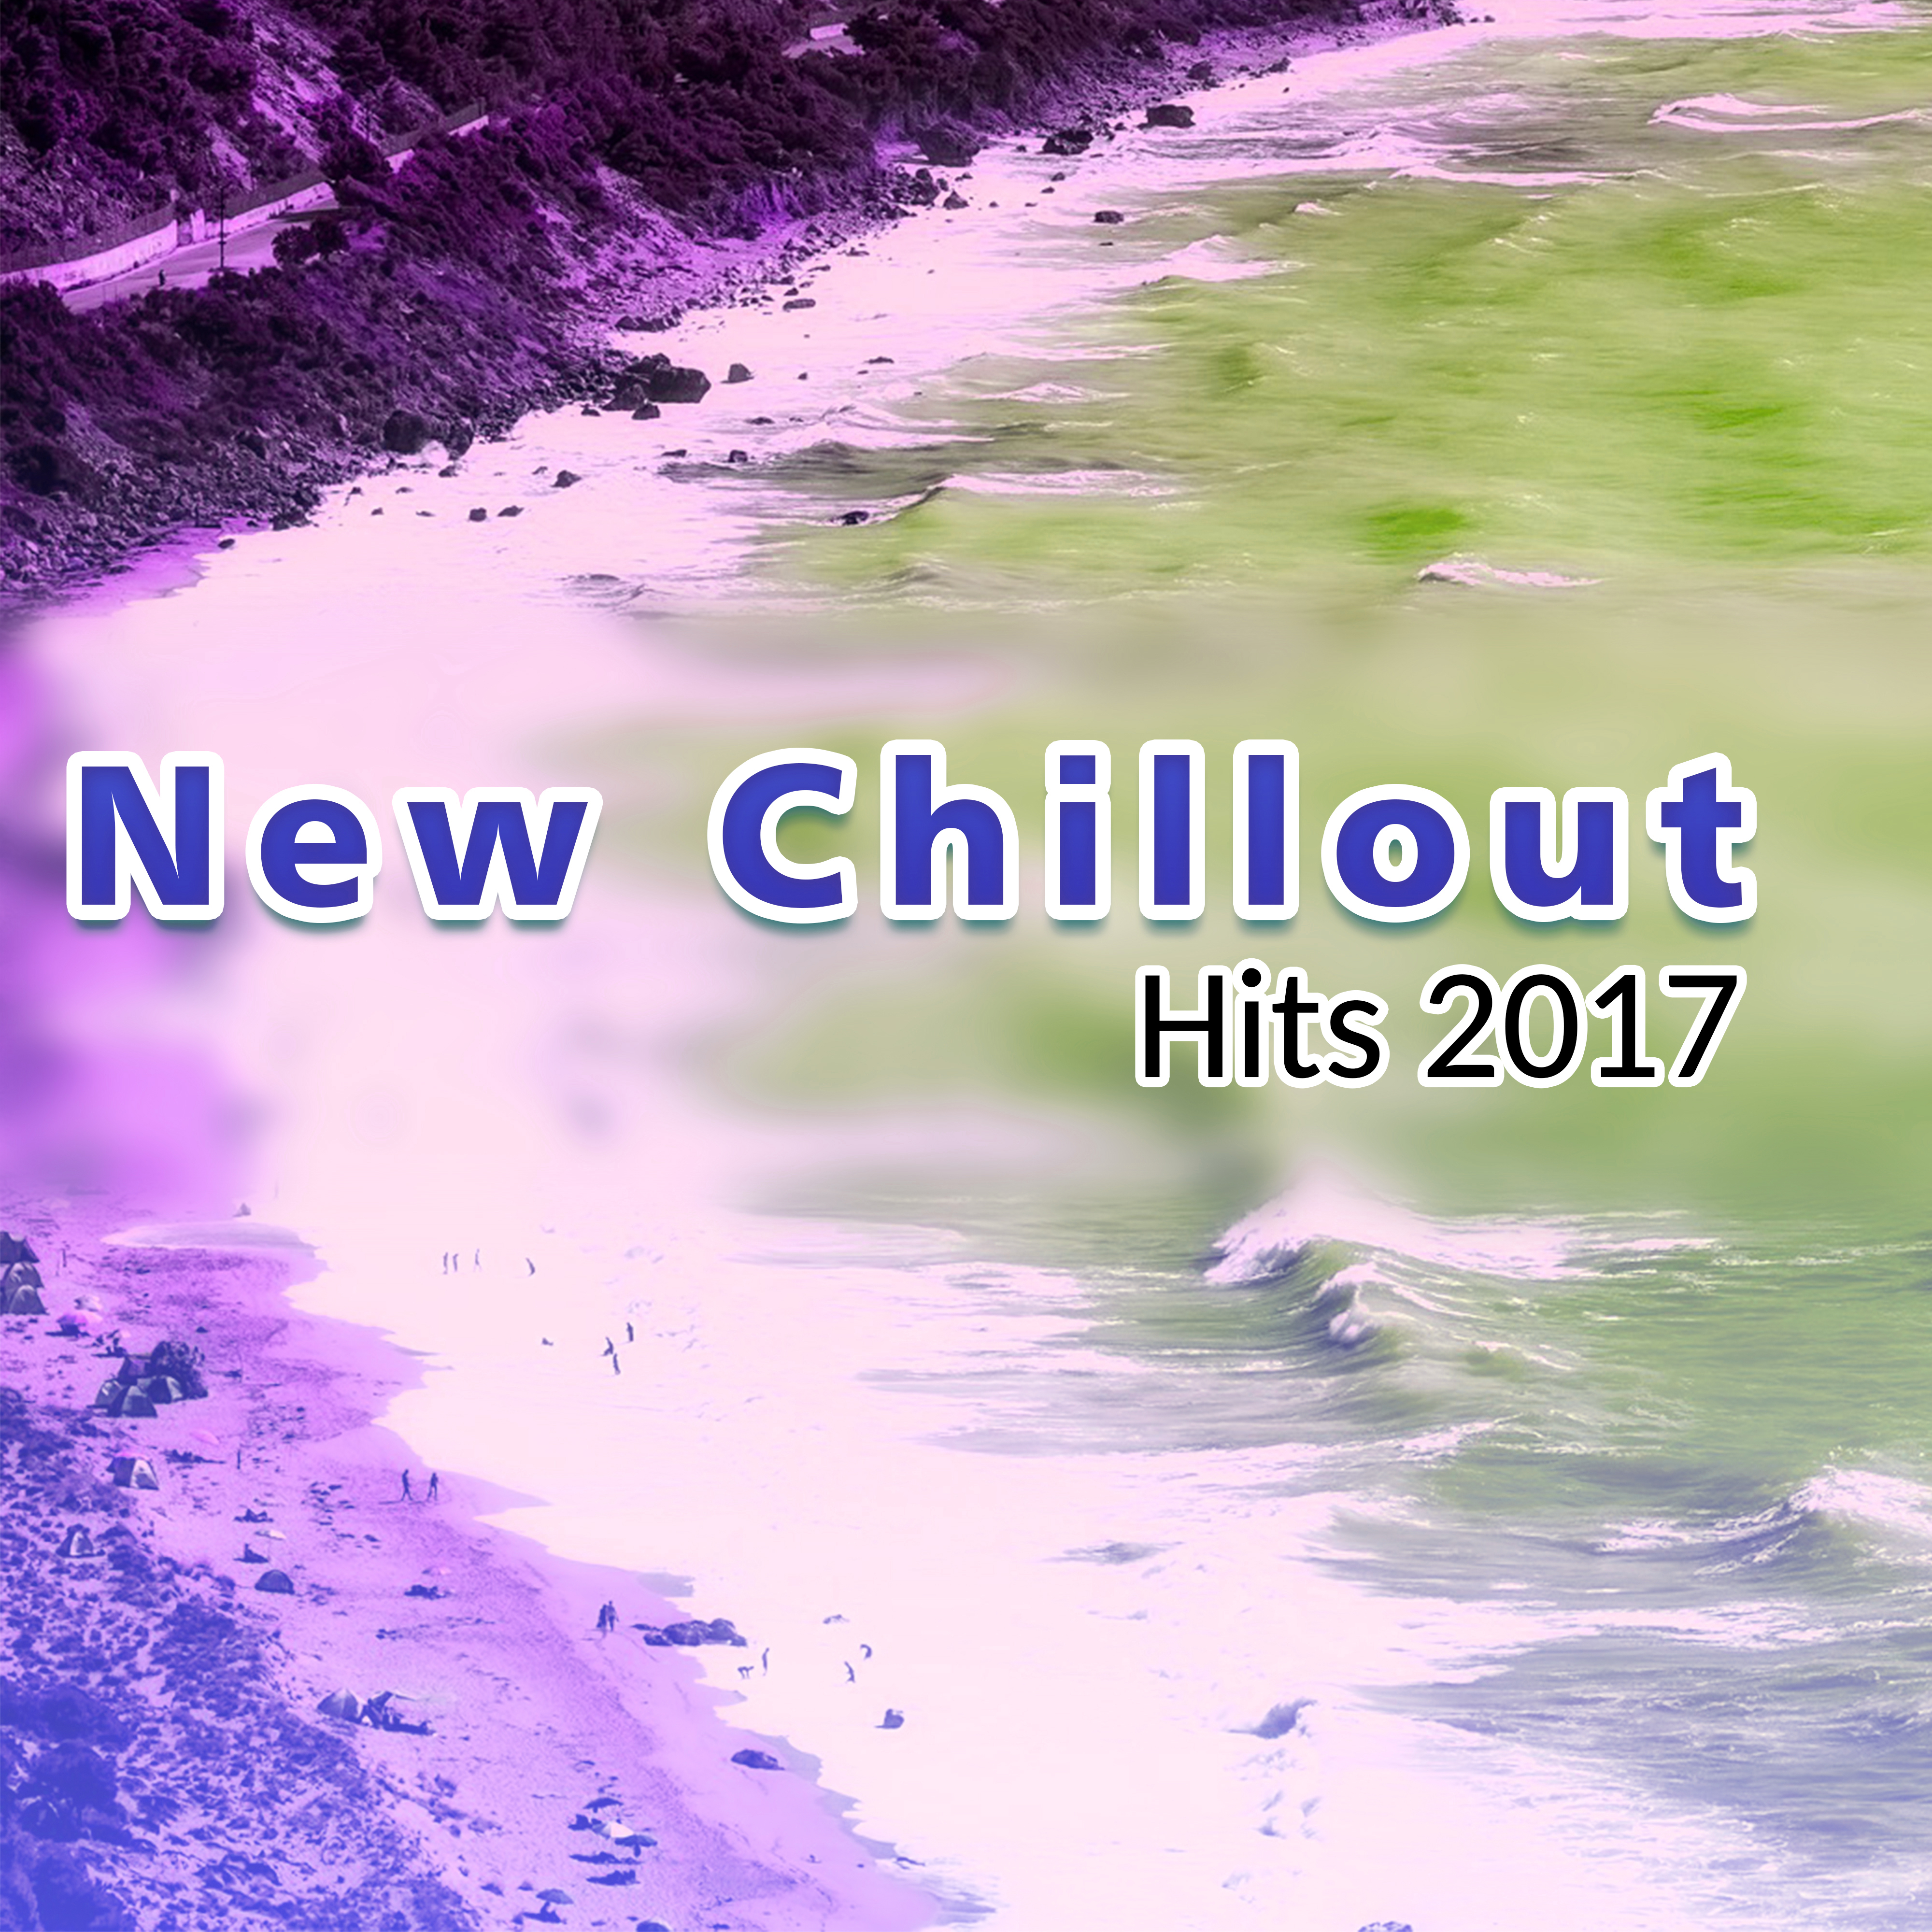 New Chillout Hits 2017 – Autumn Hits 2017, Chillout Music, Relax, New Beats